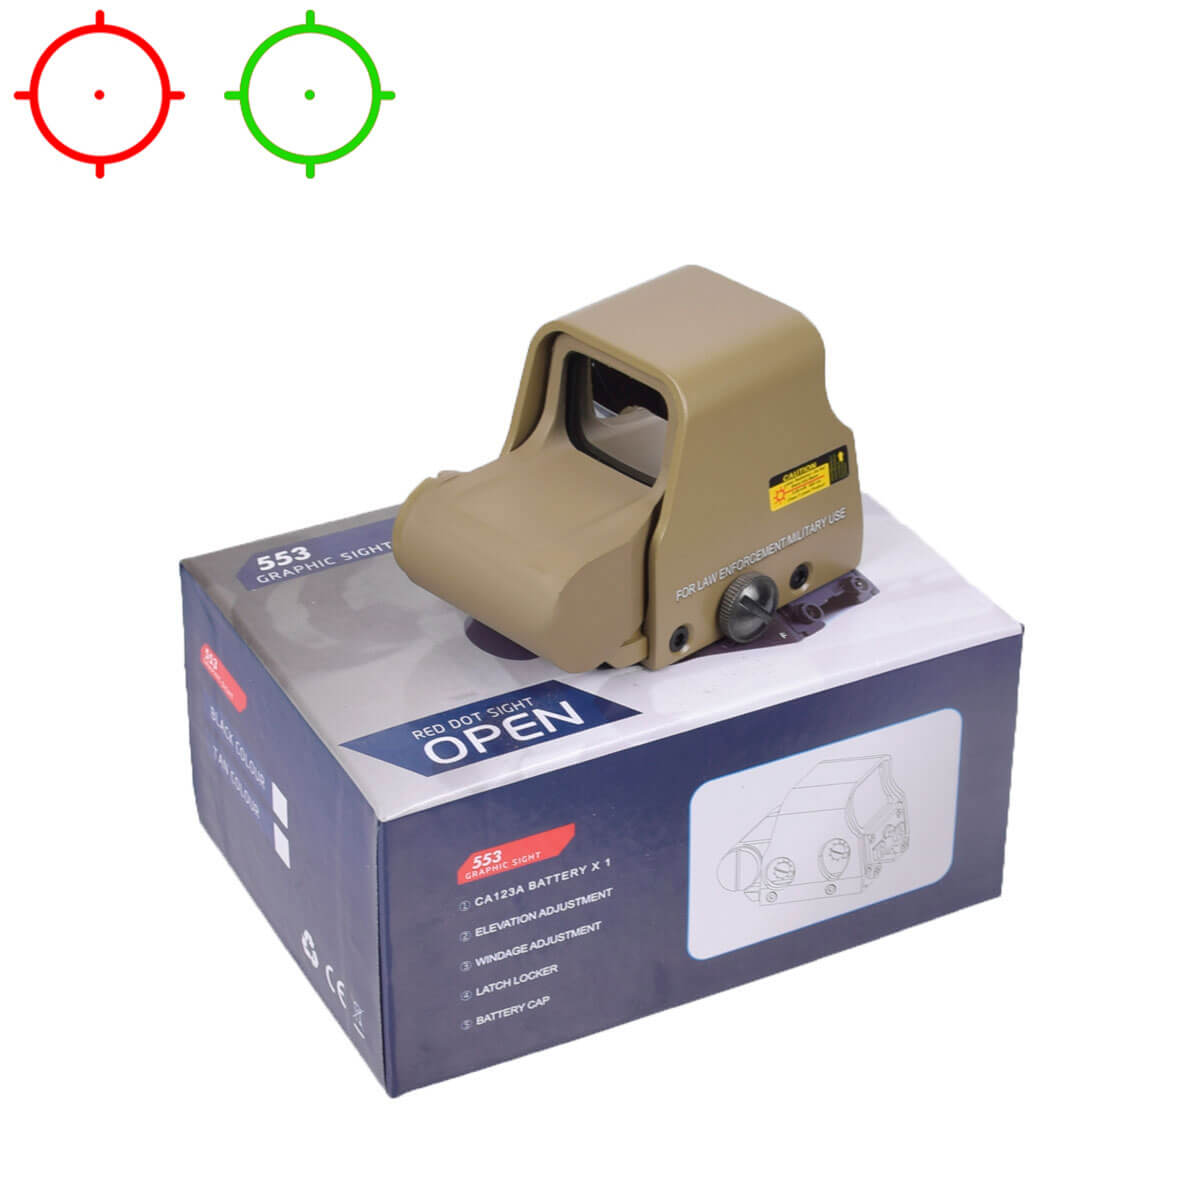 551 552 553 558 Red Green Dot Holographic Sight Scope 20mm Mount